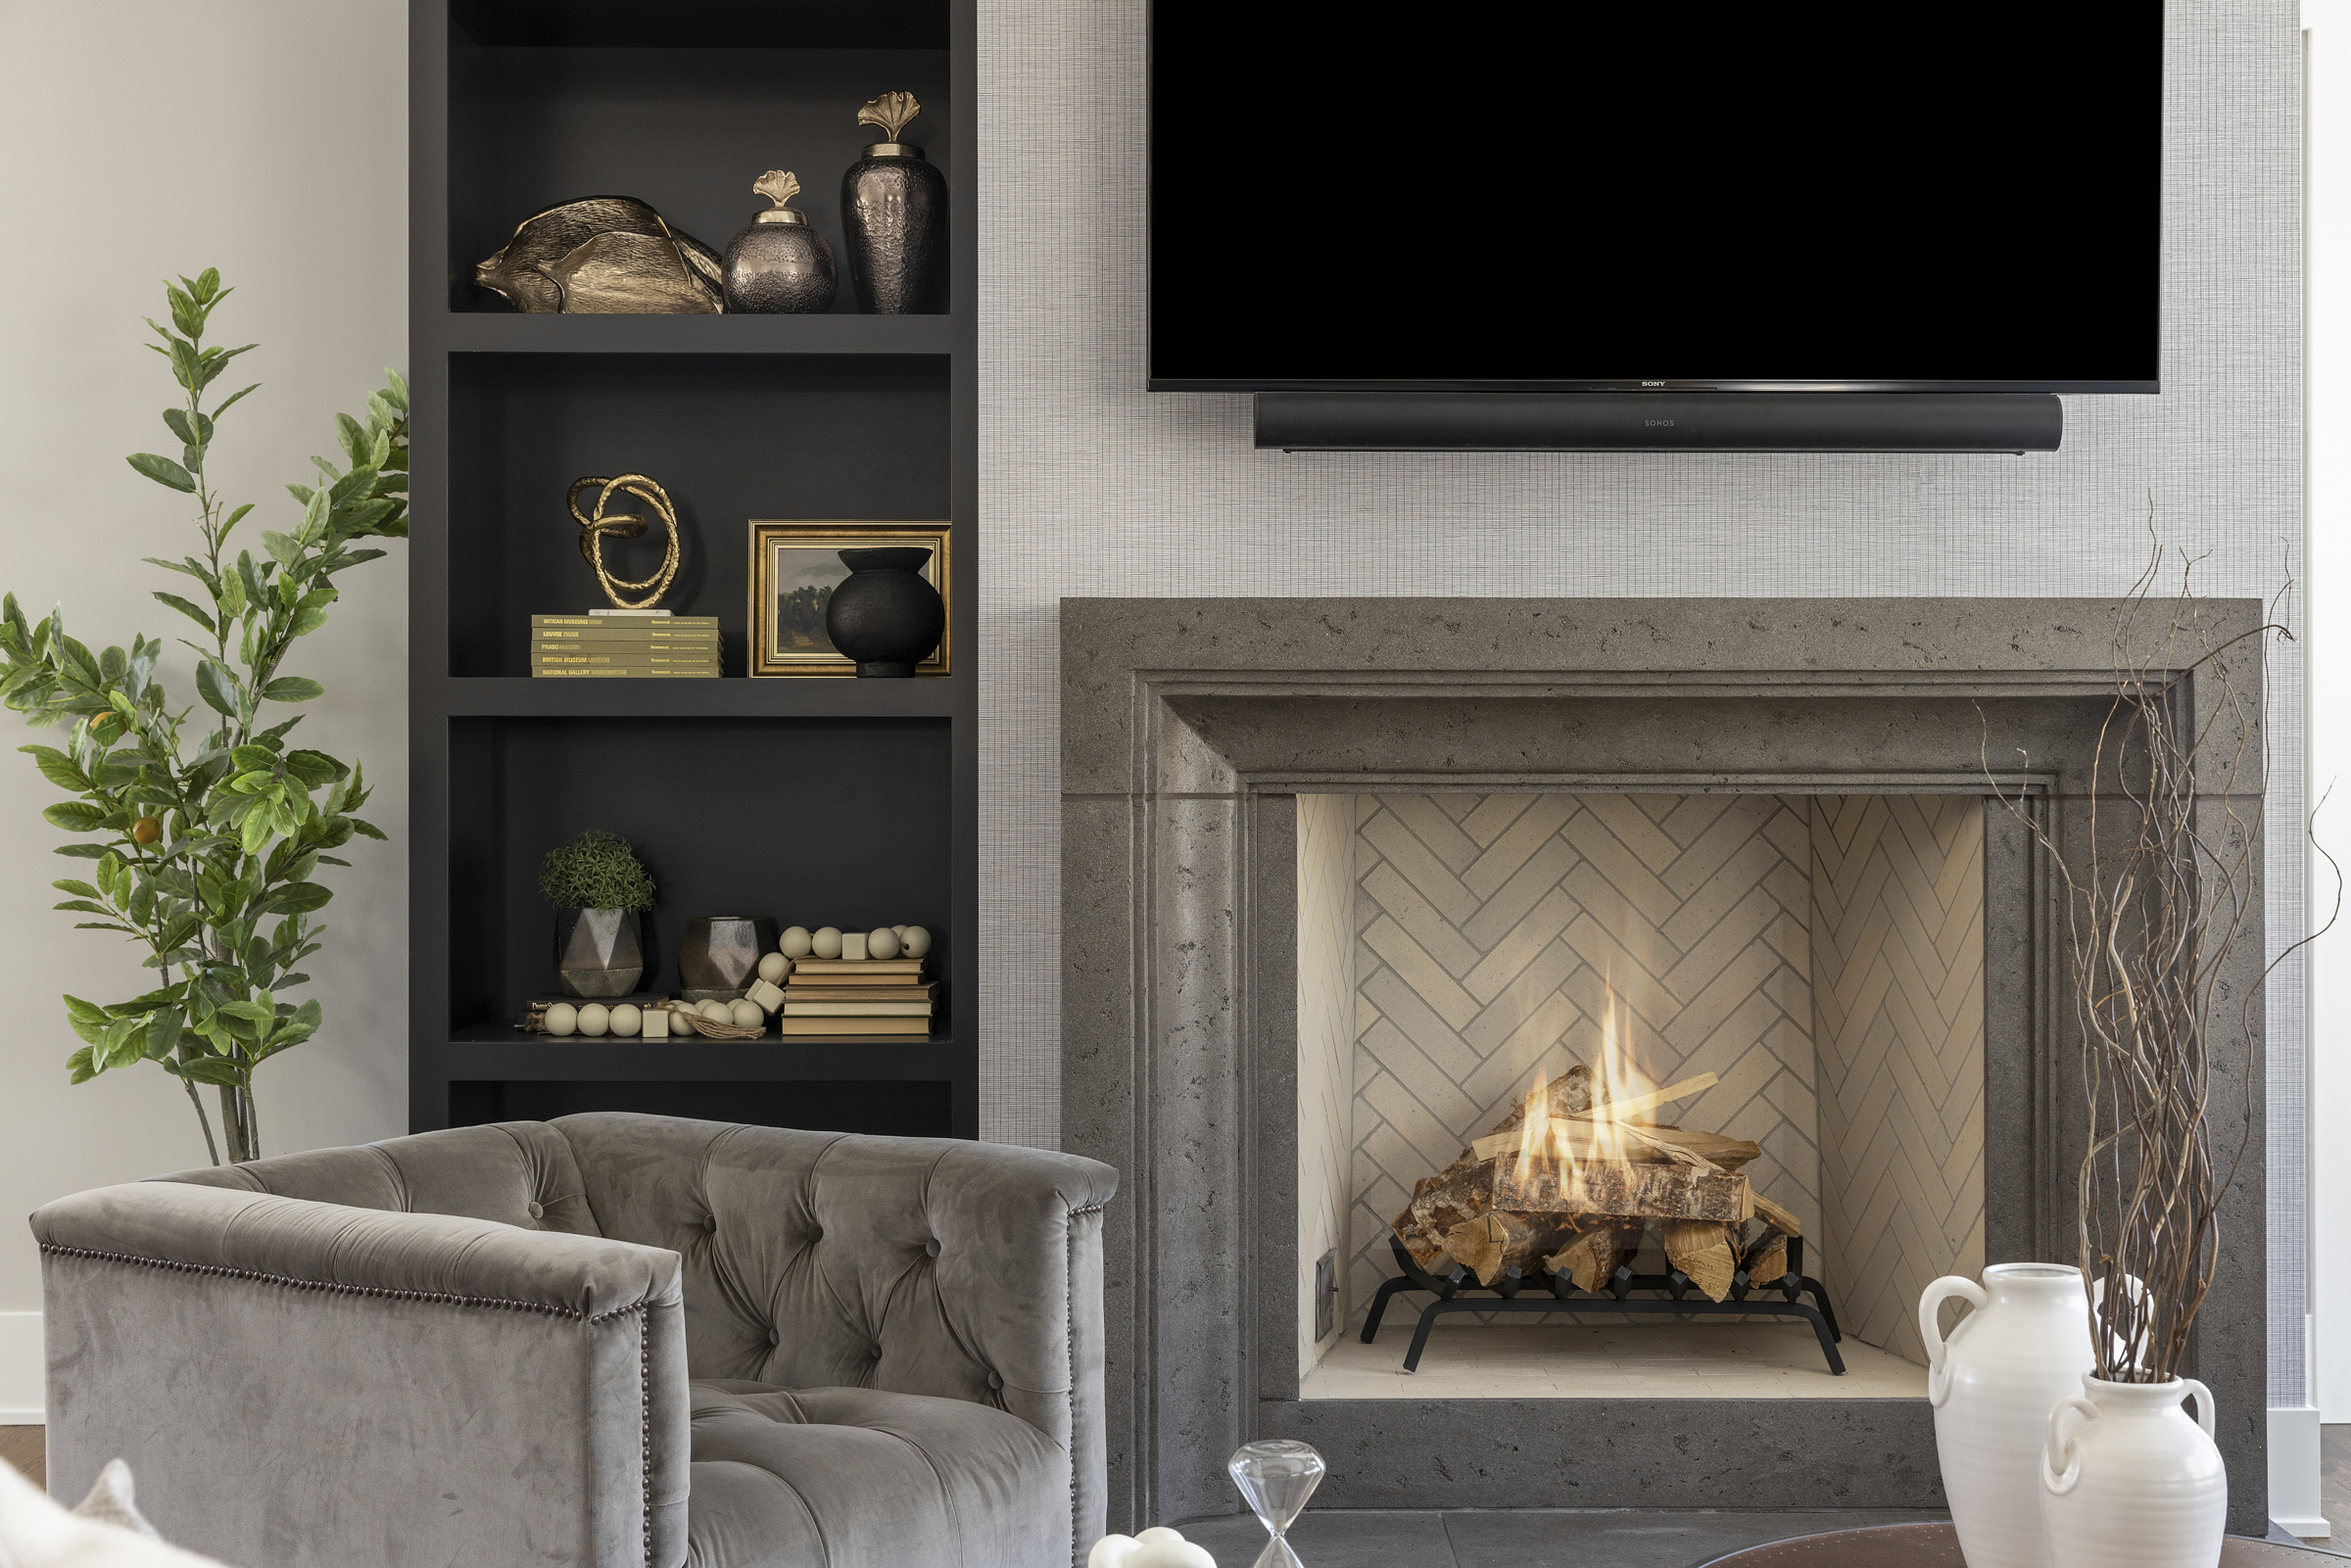 A fireplace in a living room with a tv above it.